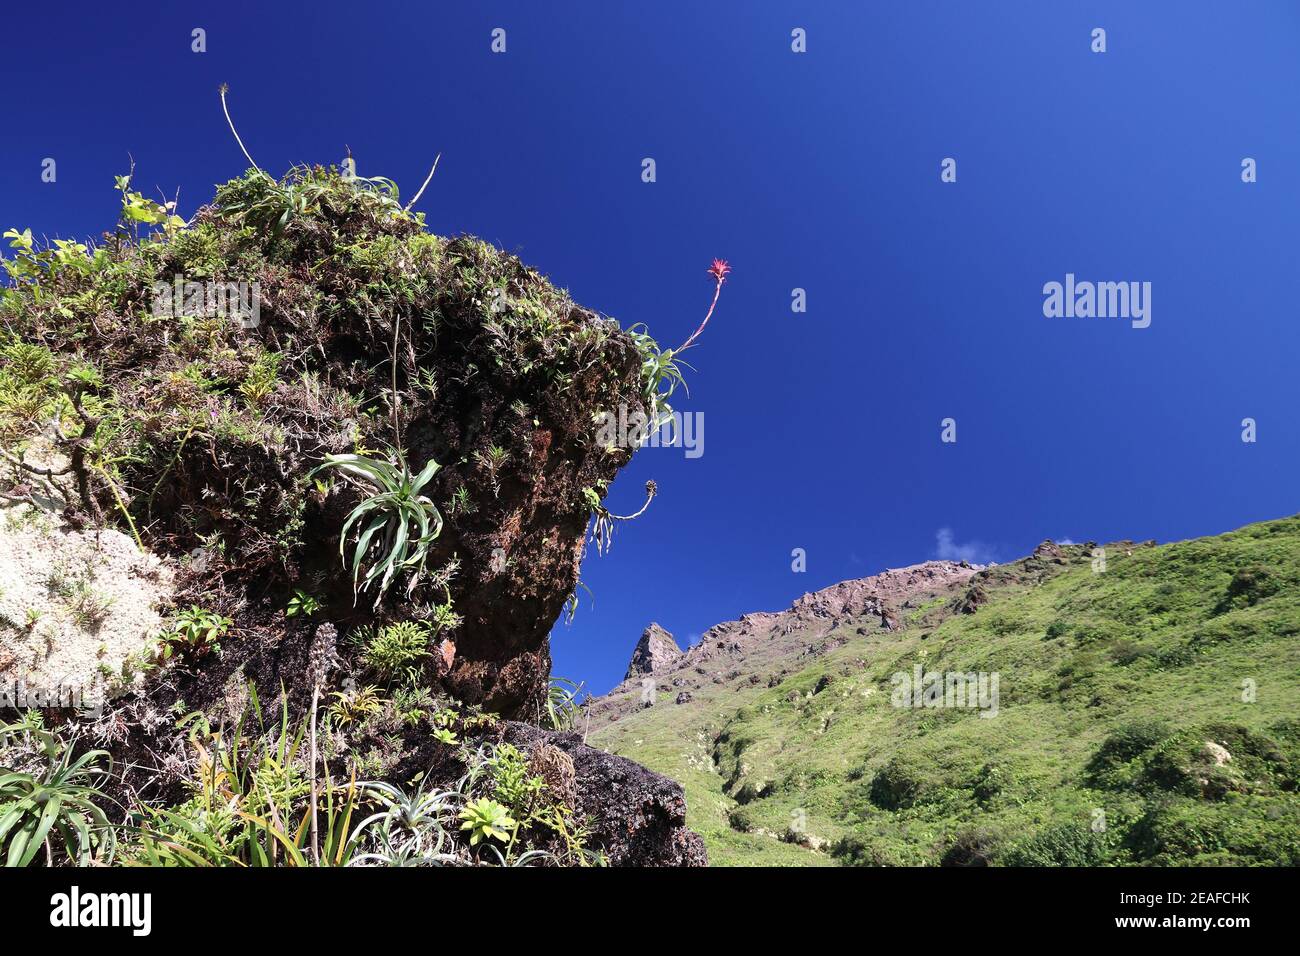 Bromeliad plants in Guadeloupe - Pitcairnia bifrons species. La Soufriere volcano in background. Stock Photo